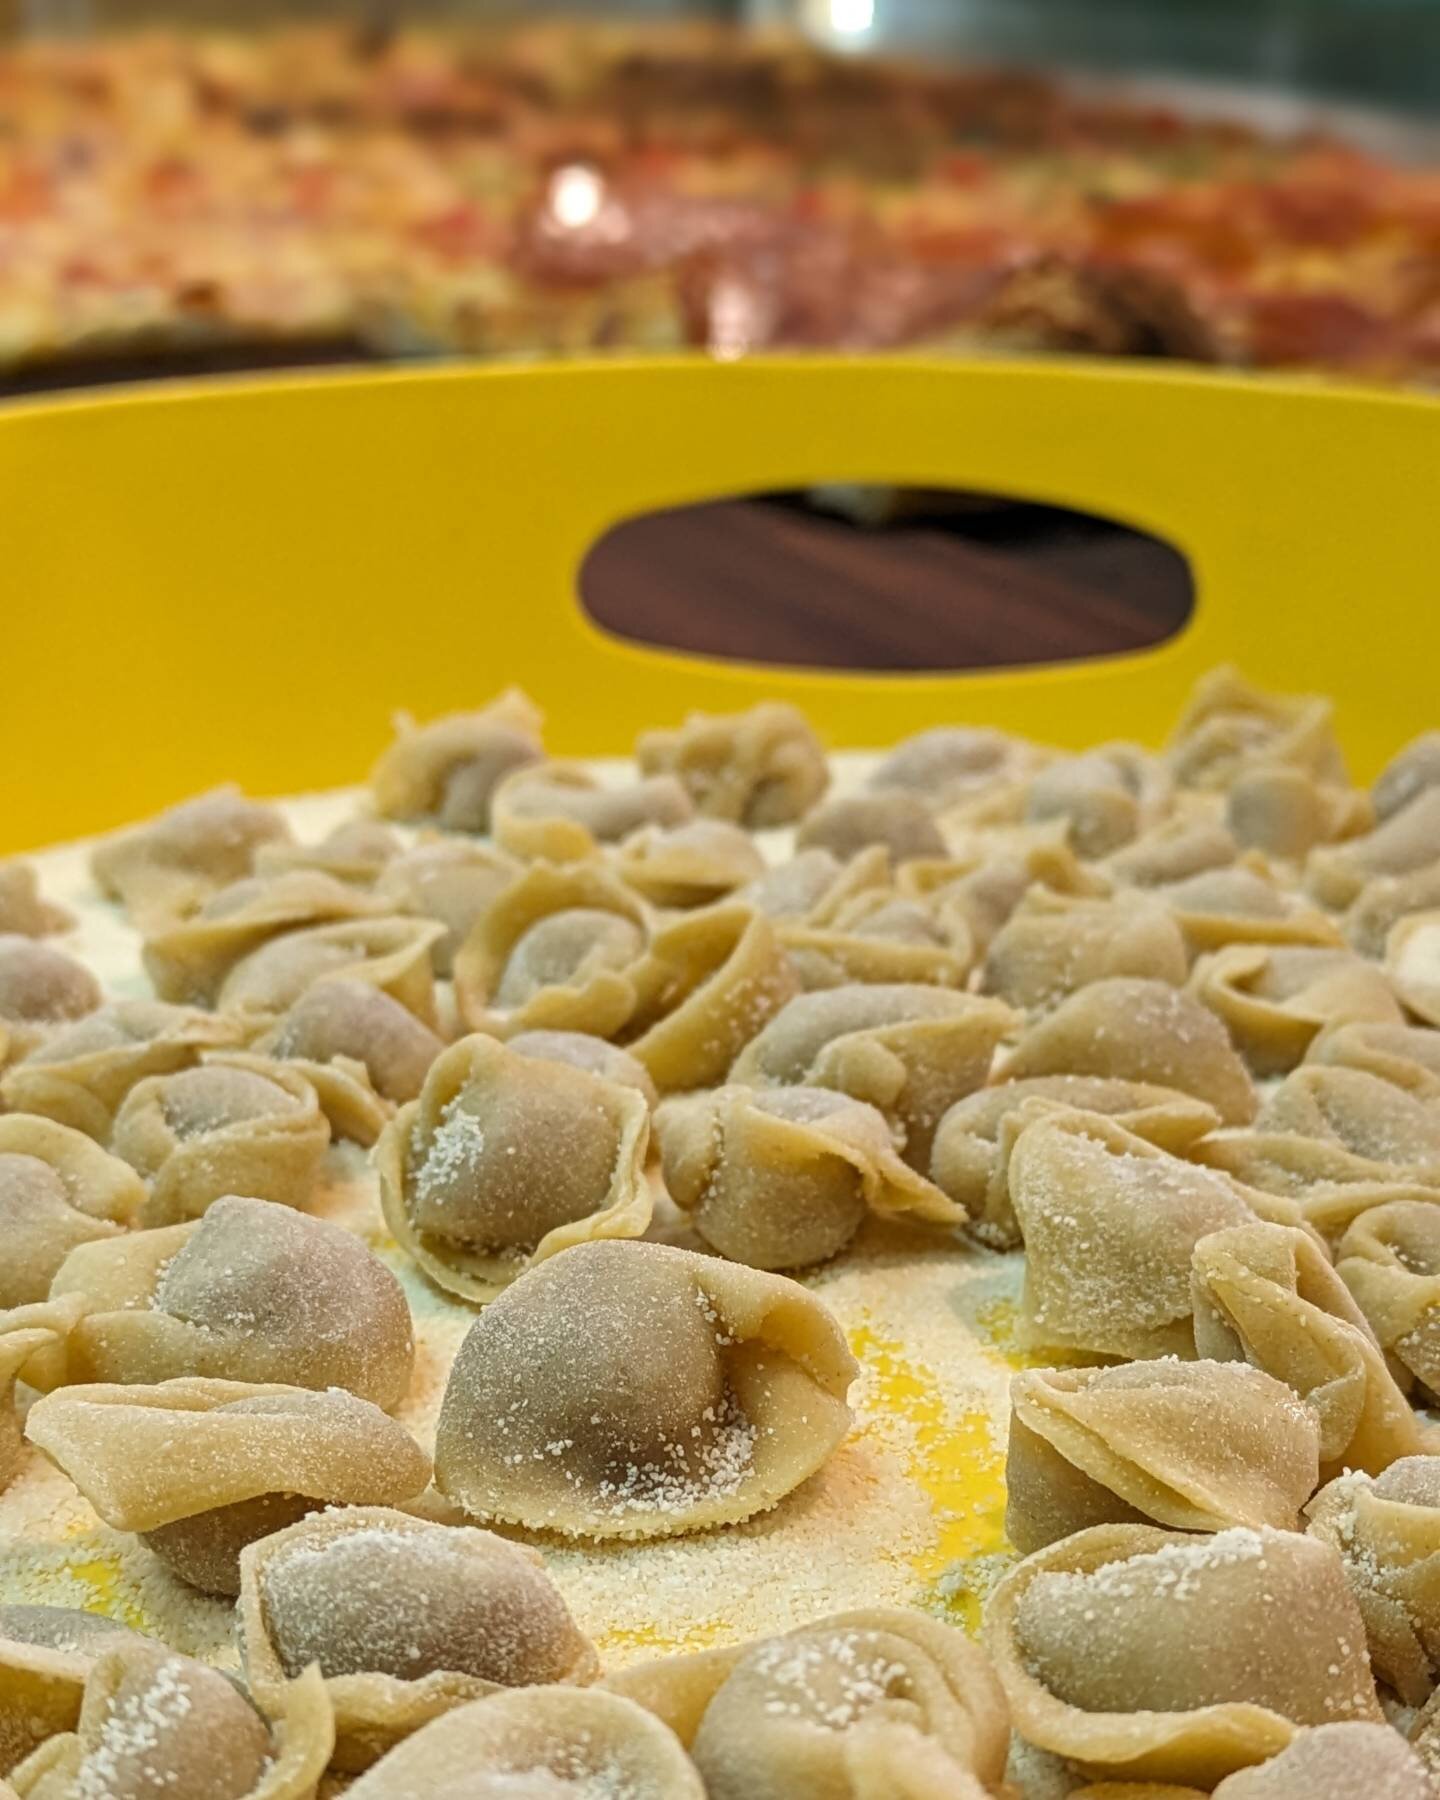 Have you tried our hand made Tortellini yet? They go perfectly with broth or with a simple sauce. Order some now from https://www.pomodoropizzeria.com/pasta-form and we will make them fresh for you!